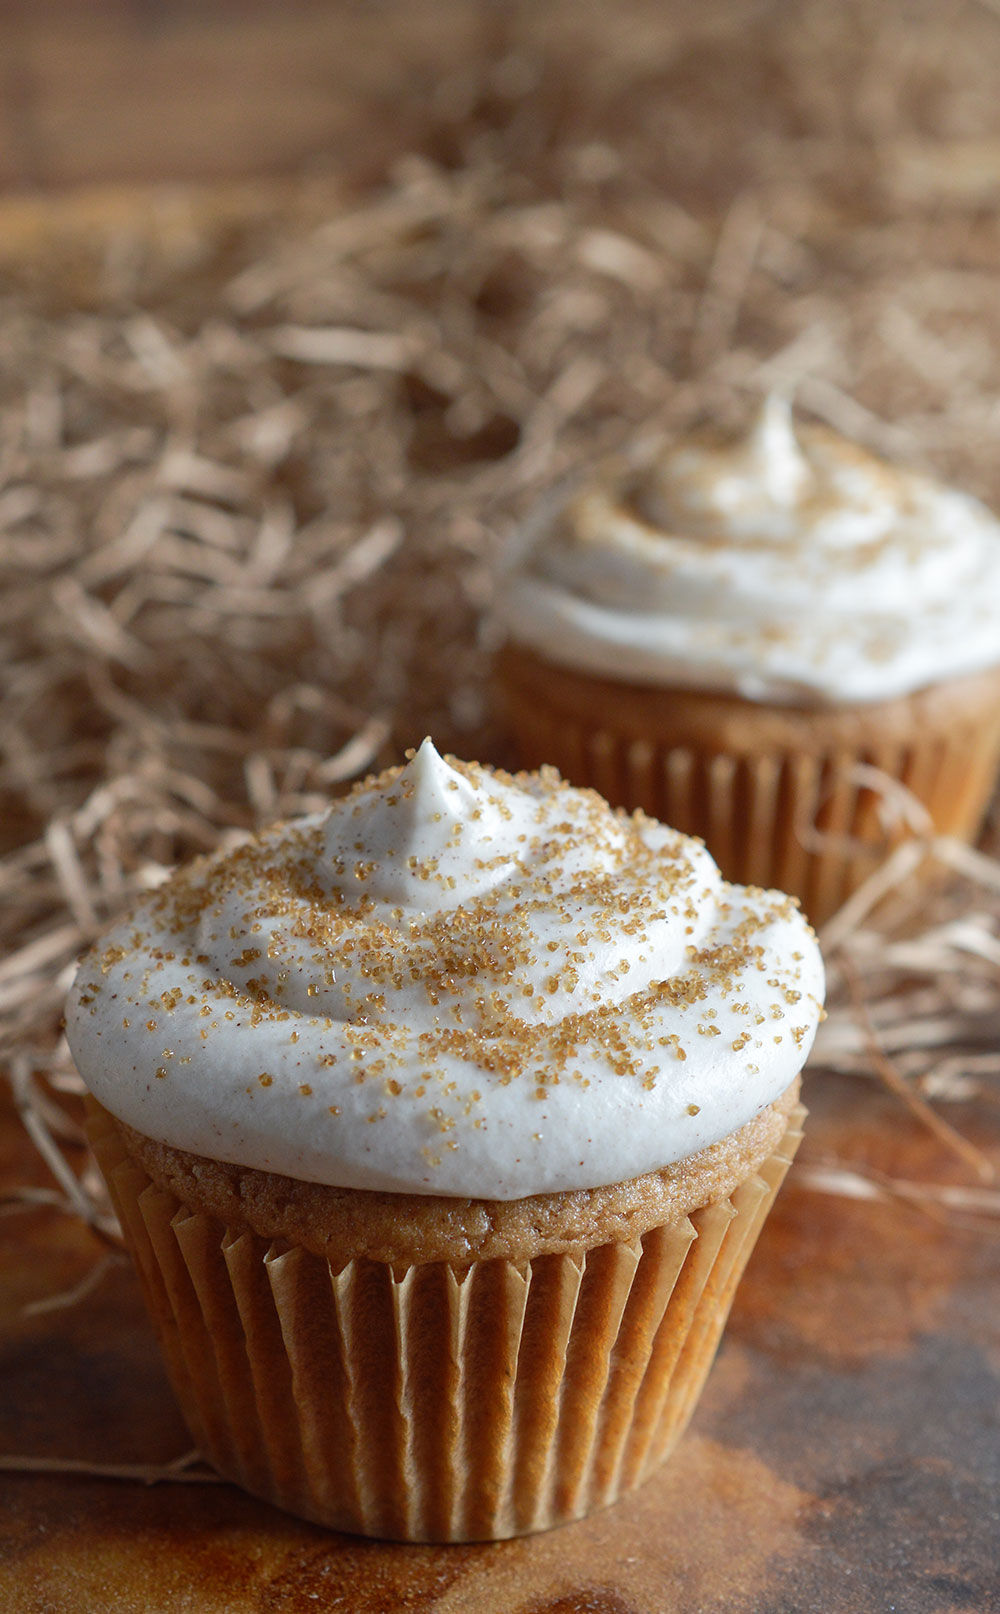 http://wonkywonderful.com/spiced-cupcakes-with-cinnamon-cream-cheese-frosting/